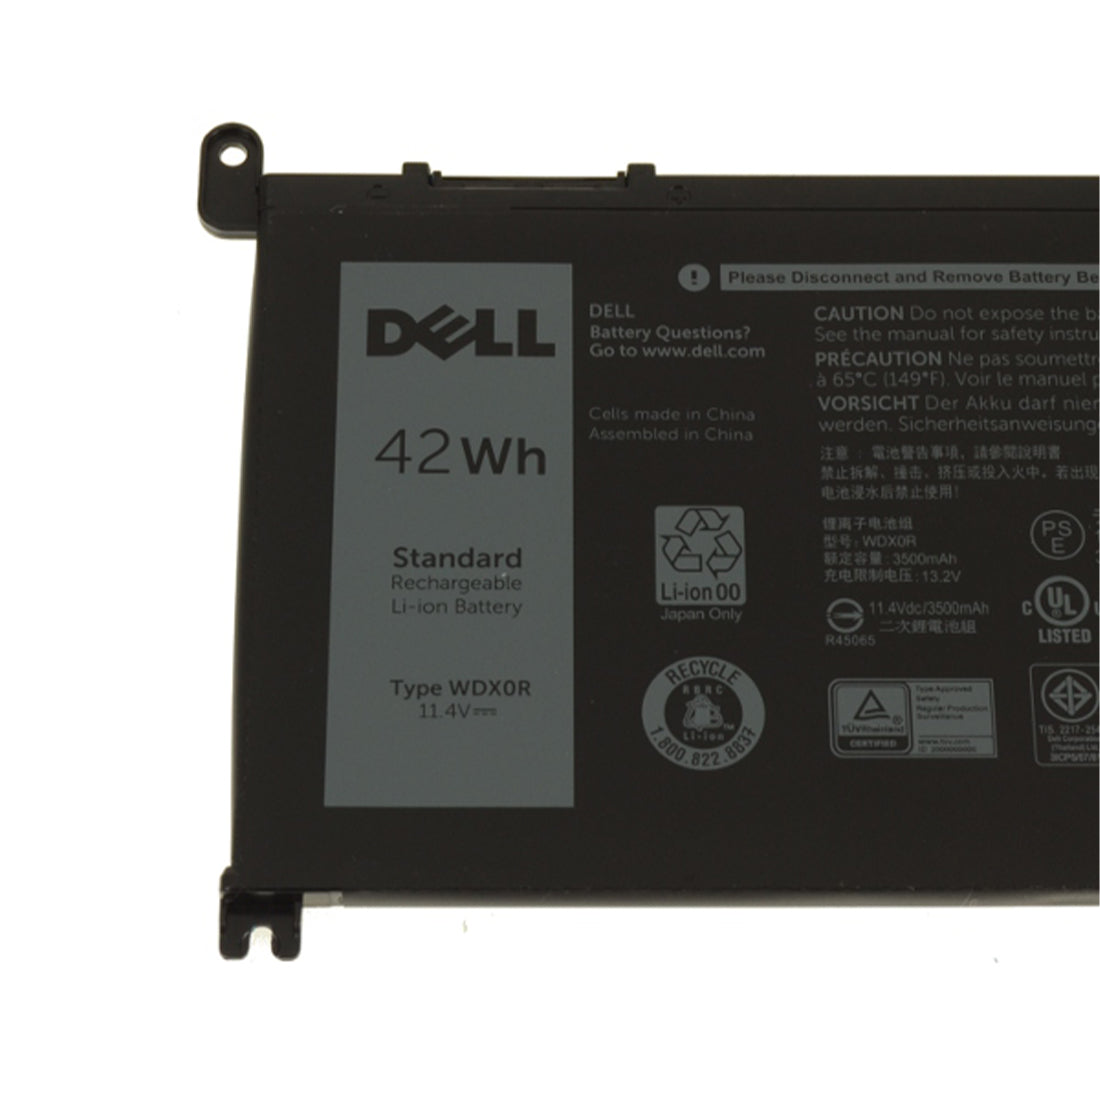 Dell Original 3500mAh 11.4V 42WHR 3-Cell Replacement Laptop Battery for Inspiron 17 5770